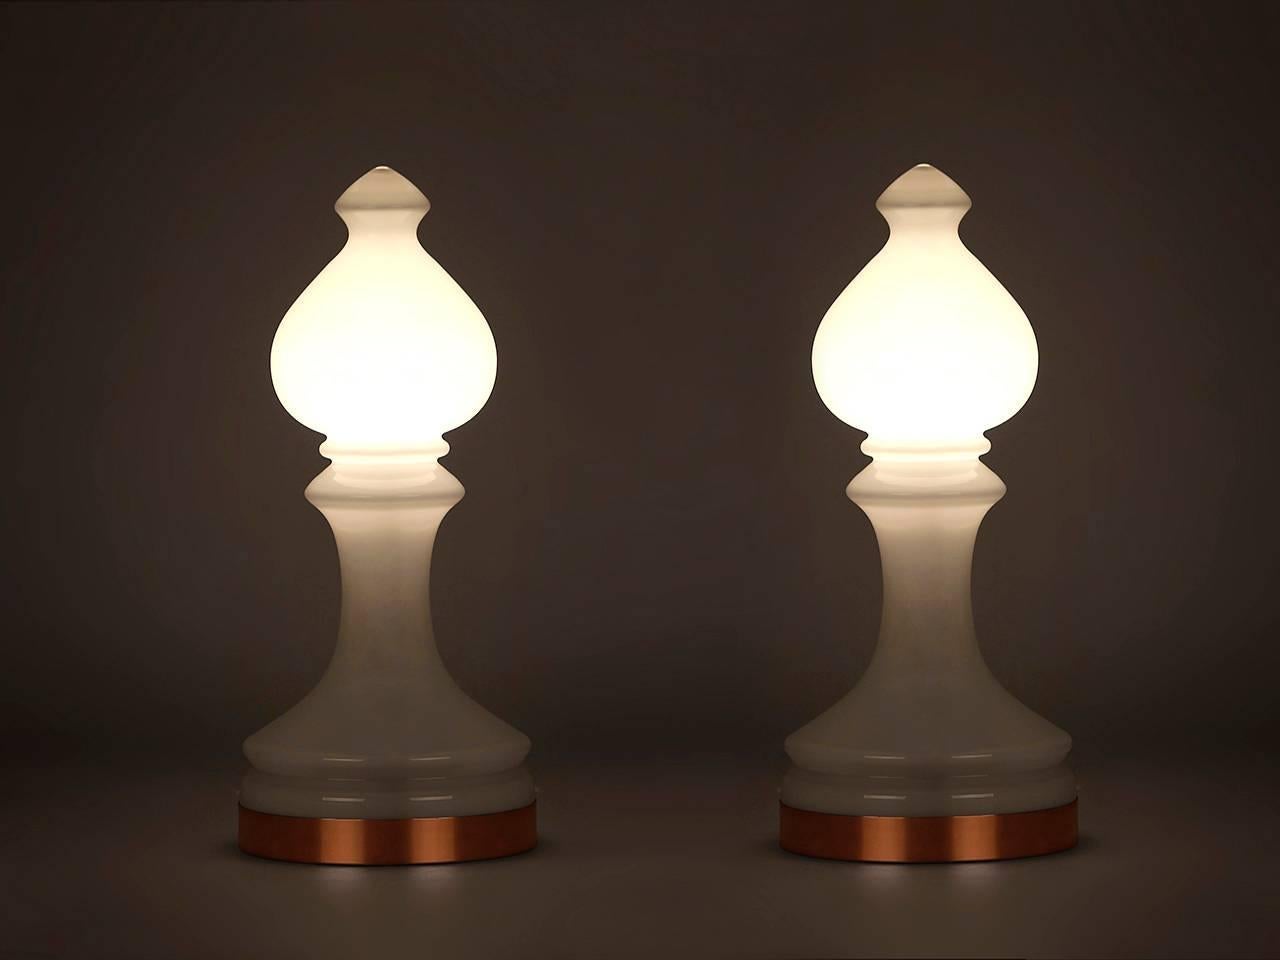 Designed by Ivan Jakeš for Valašské Mezirici in the 1970s. Made of white frosted glass with a copper ring for the base. Modeled after the bishop chess piece. The lamps were completely re-electrified. We offer shop to door delivery worldwide in